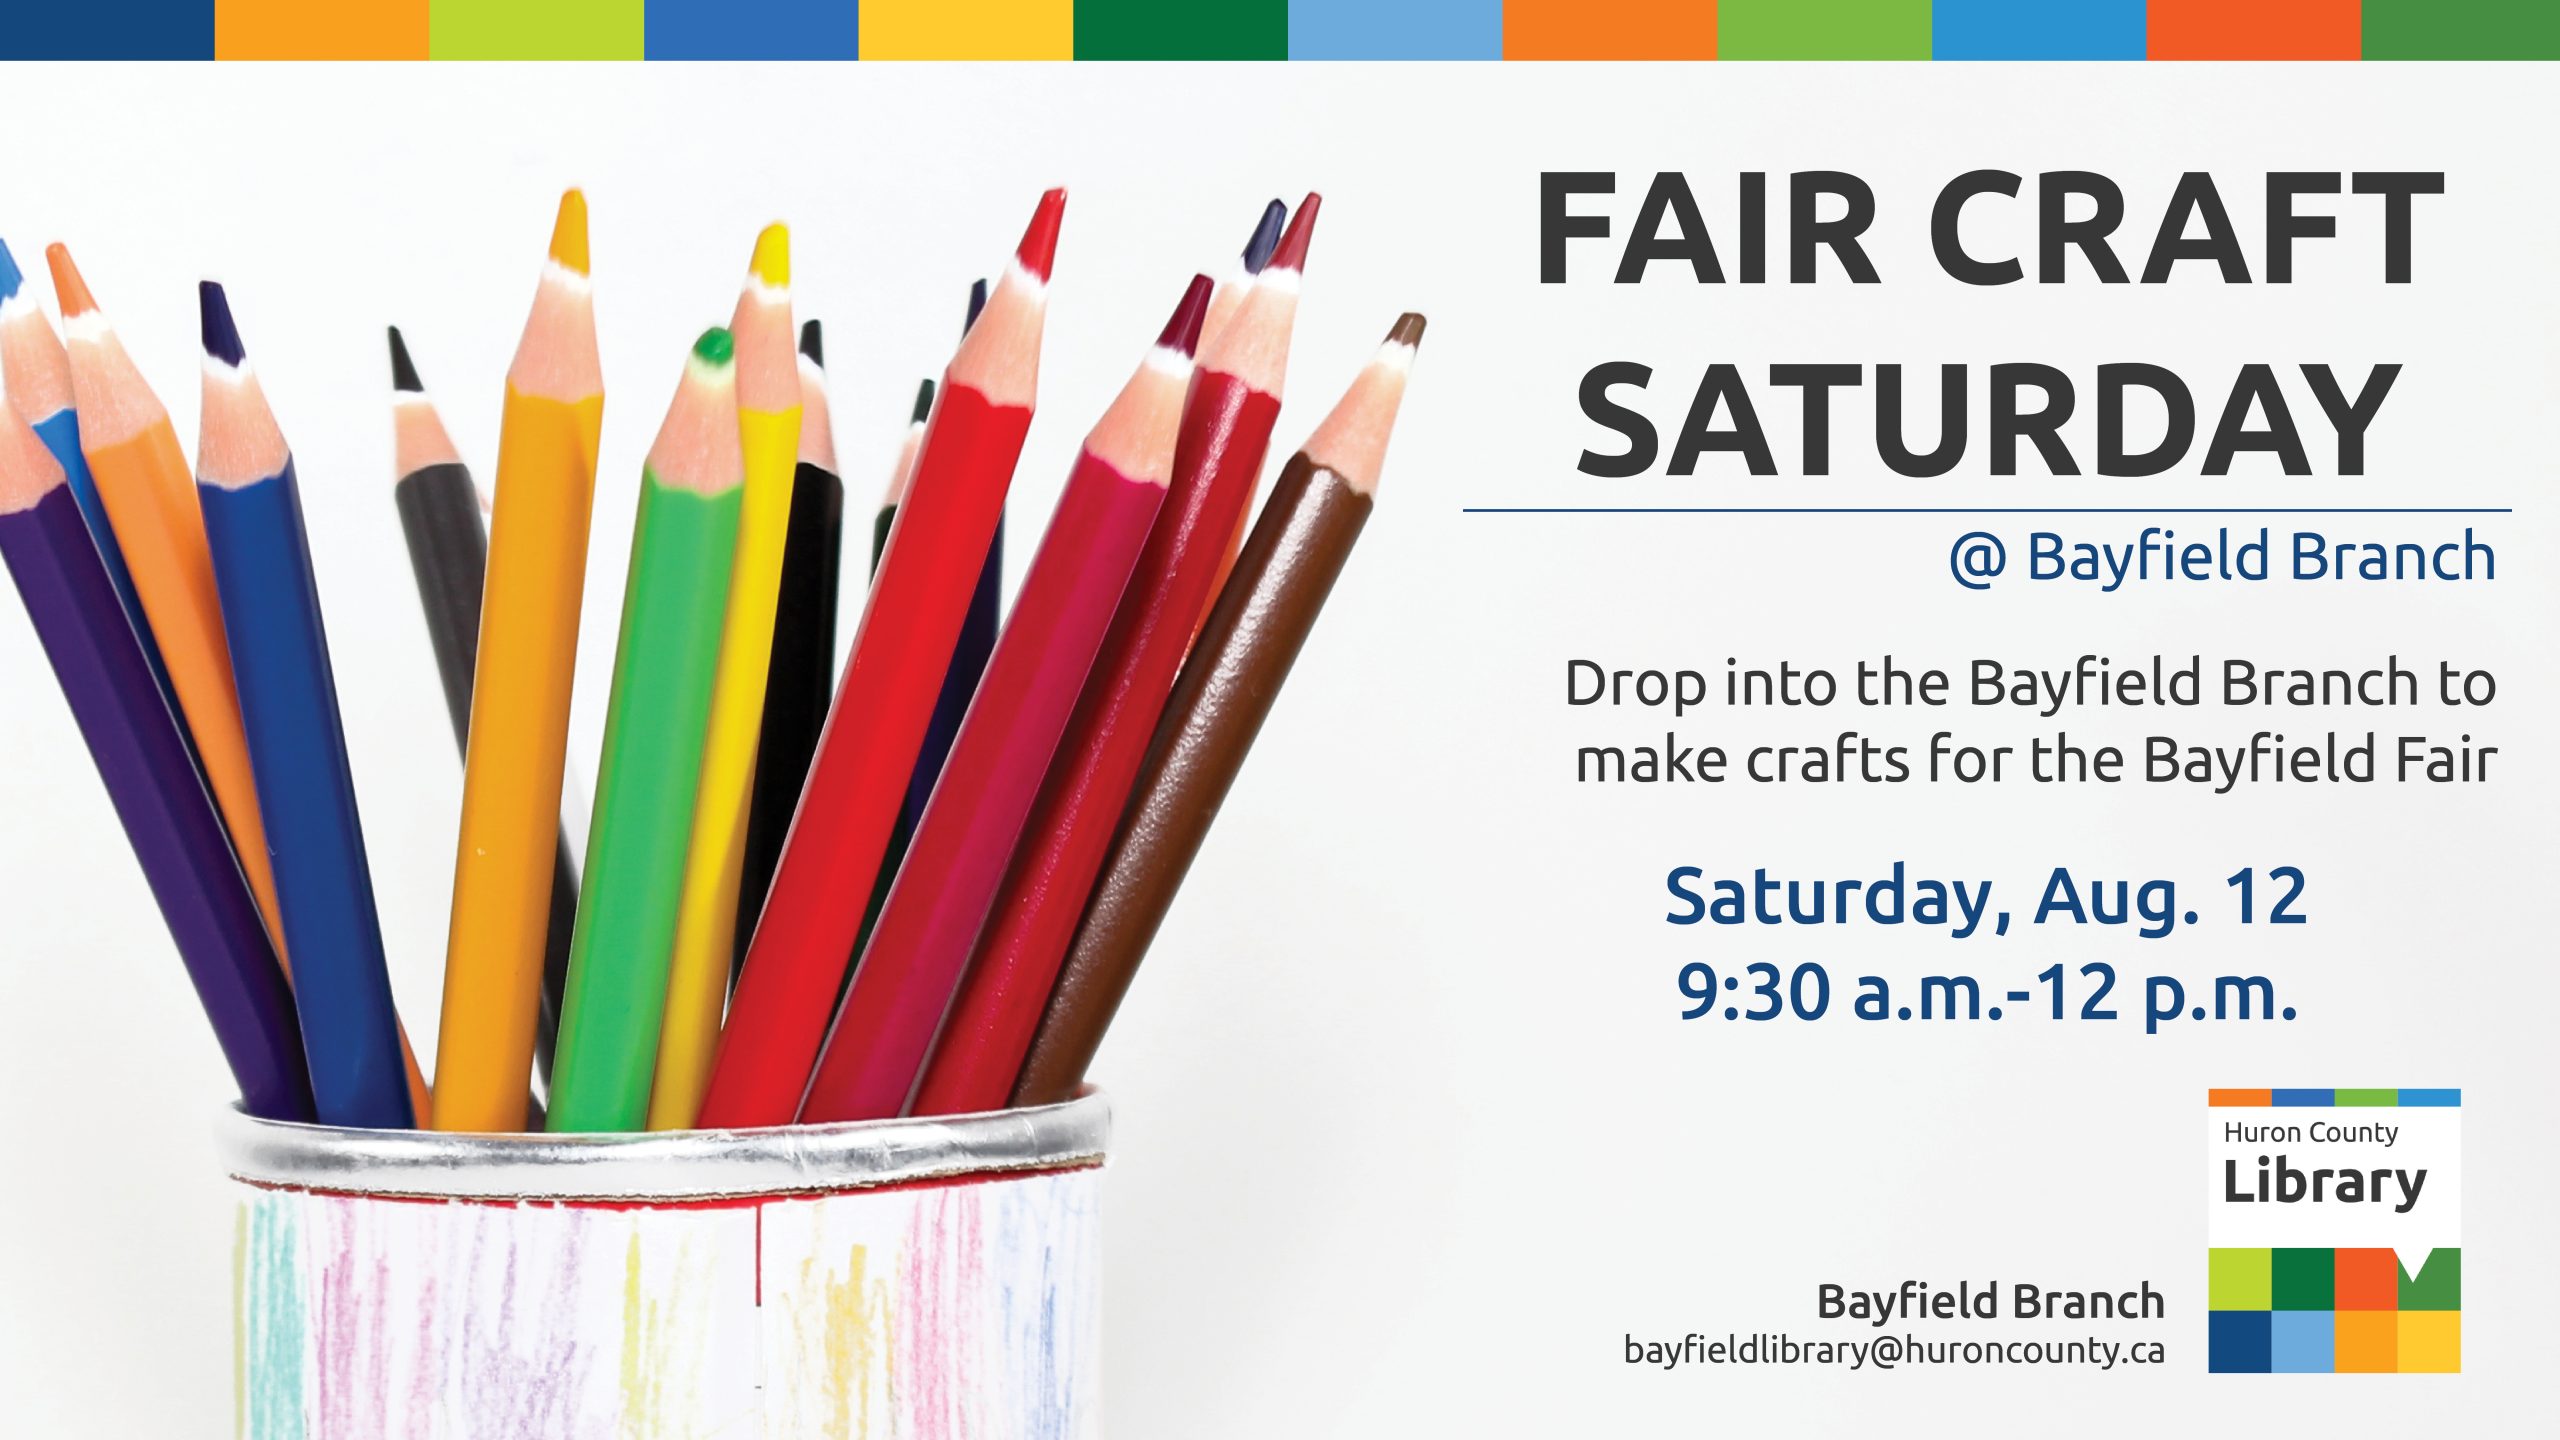 Image of a can with different coloured pencil crayons. Text promoted Fair Craft Saturday at Bayfield Branch